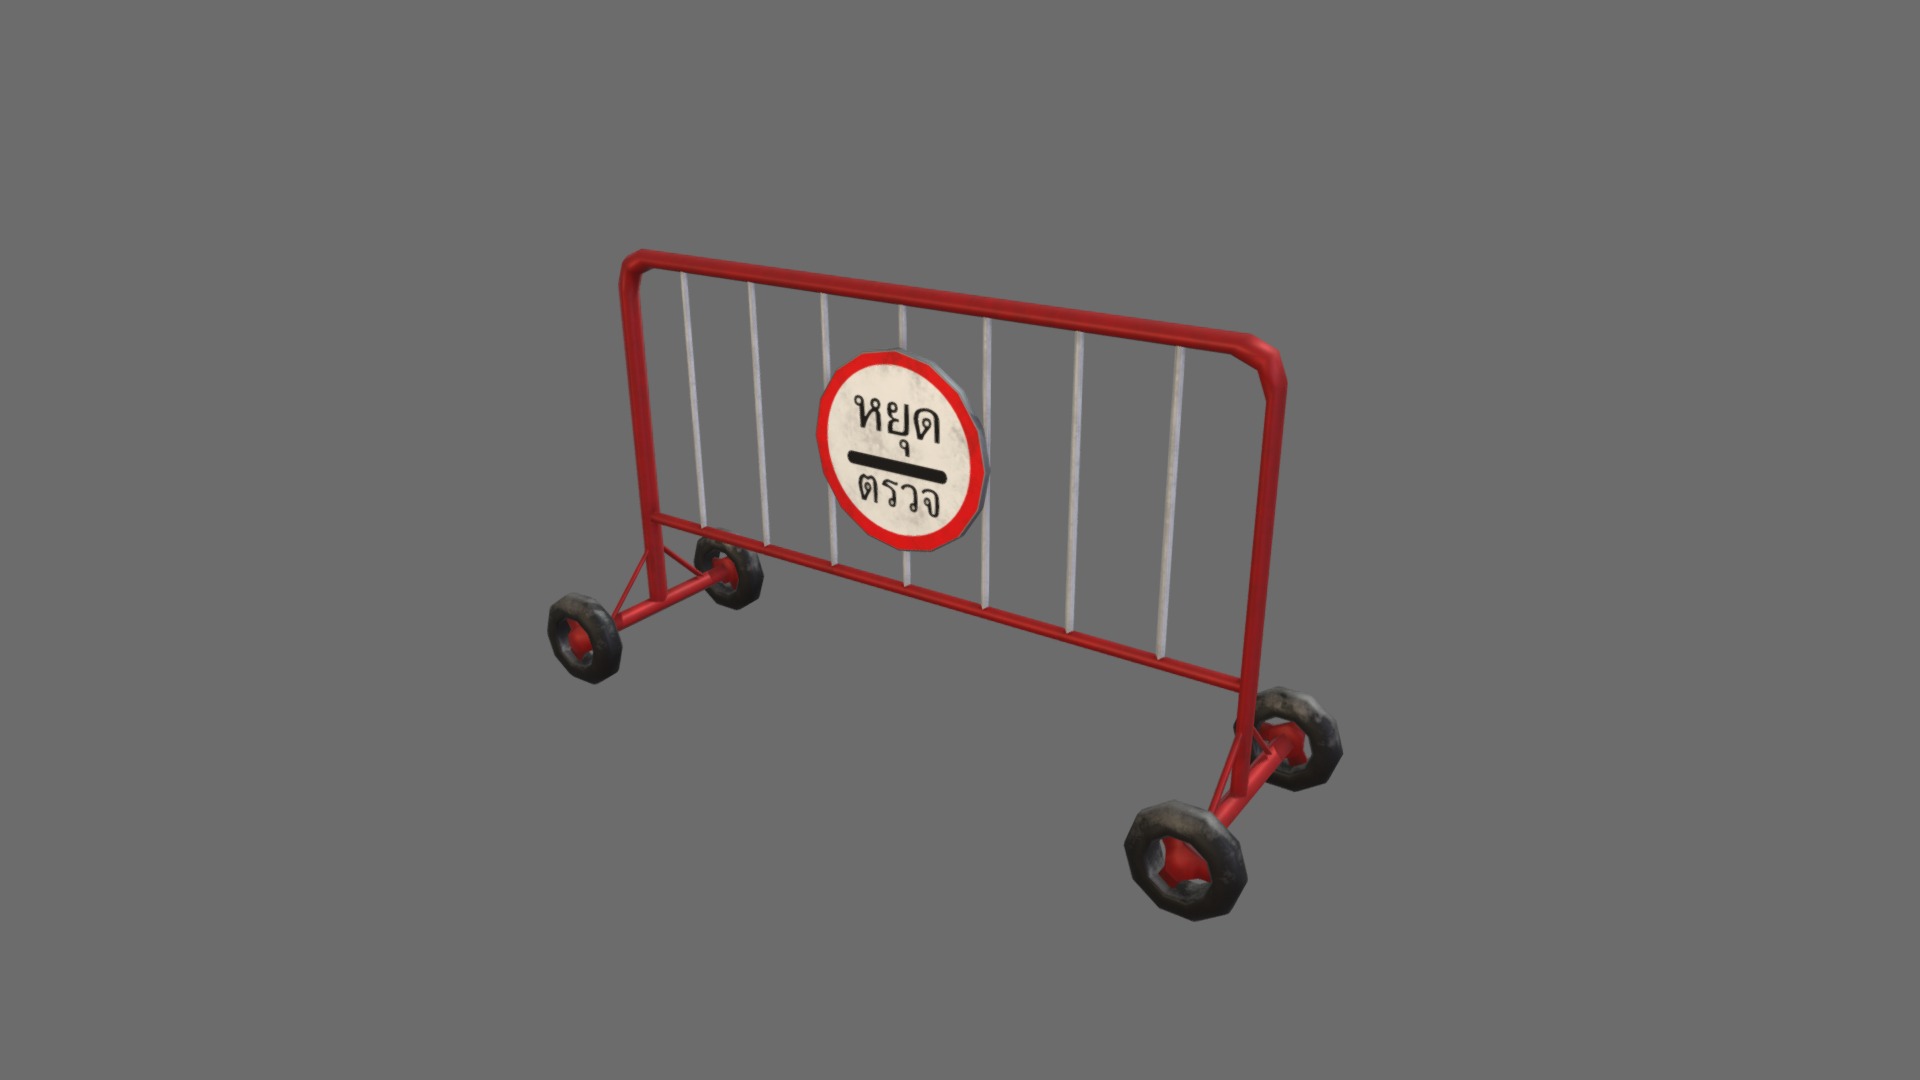 3D model Fence model 03 - This is a 3D model of the Fence model 03. The 3D model is about a red and white sign.